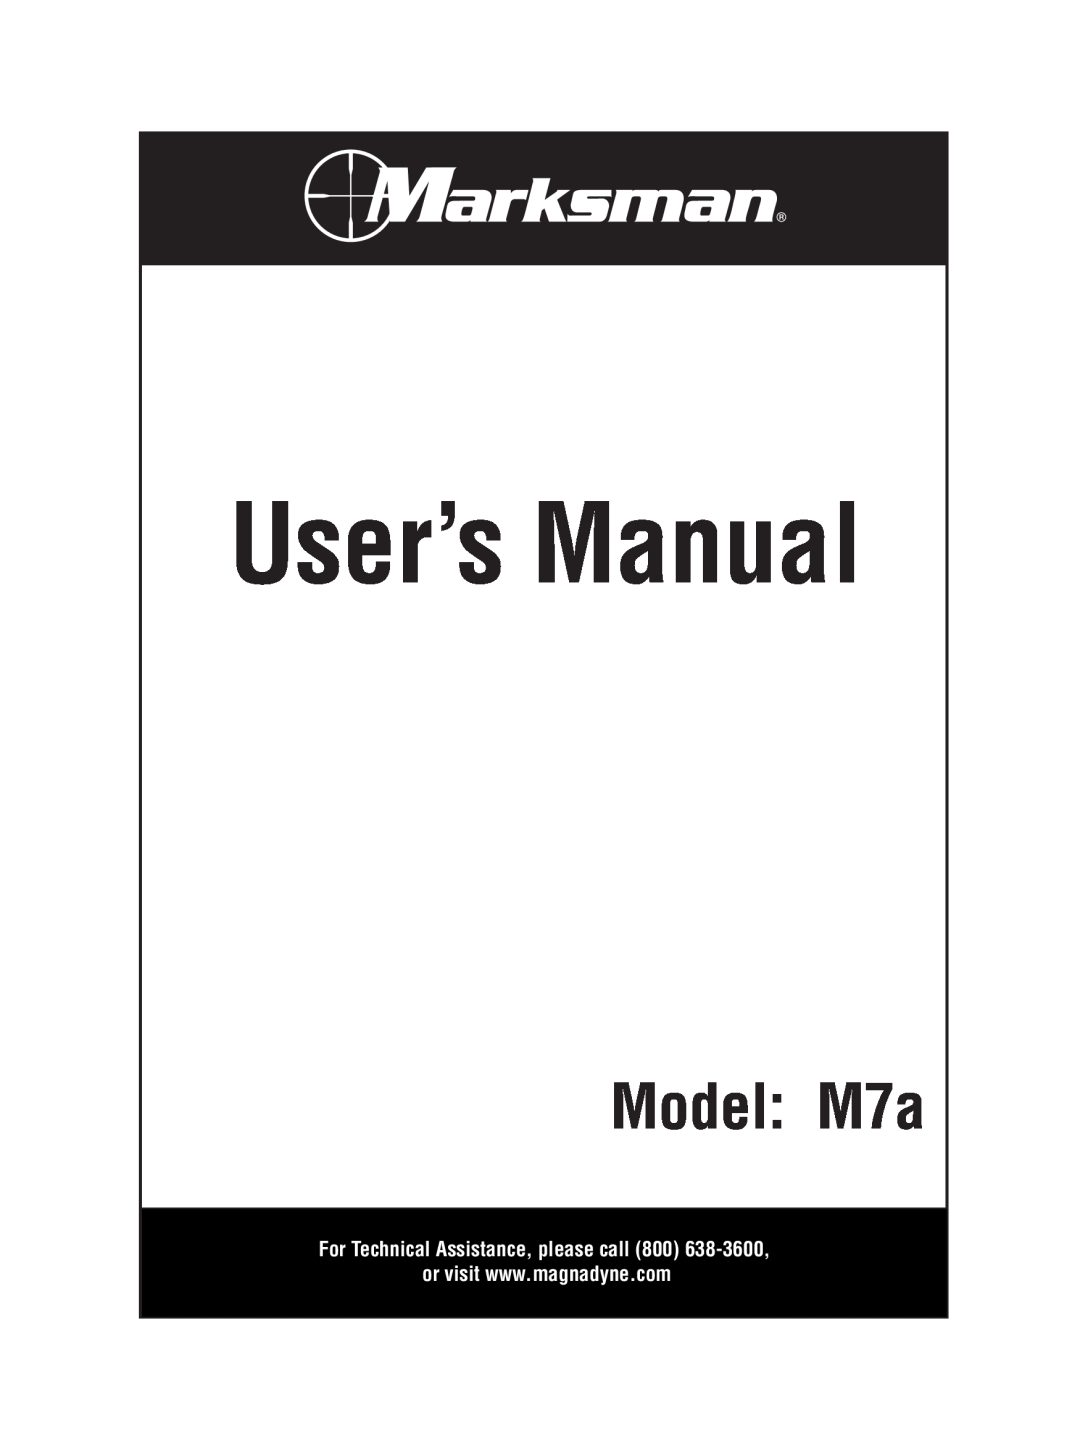 Magnadyne user manual For Technical Assistance, please call, Model M7a 